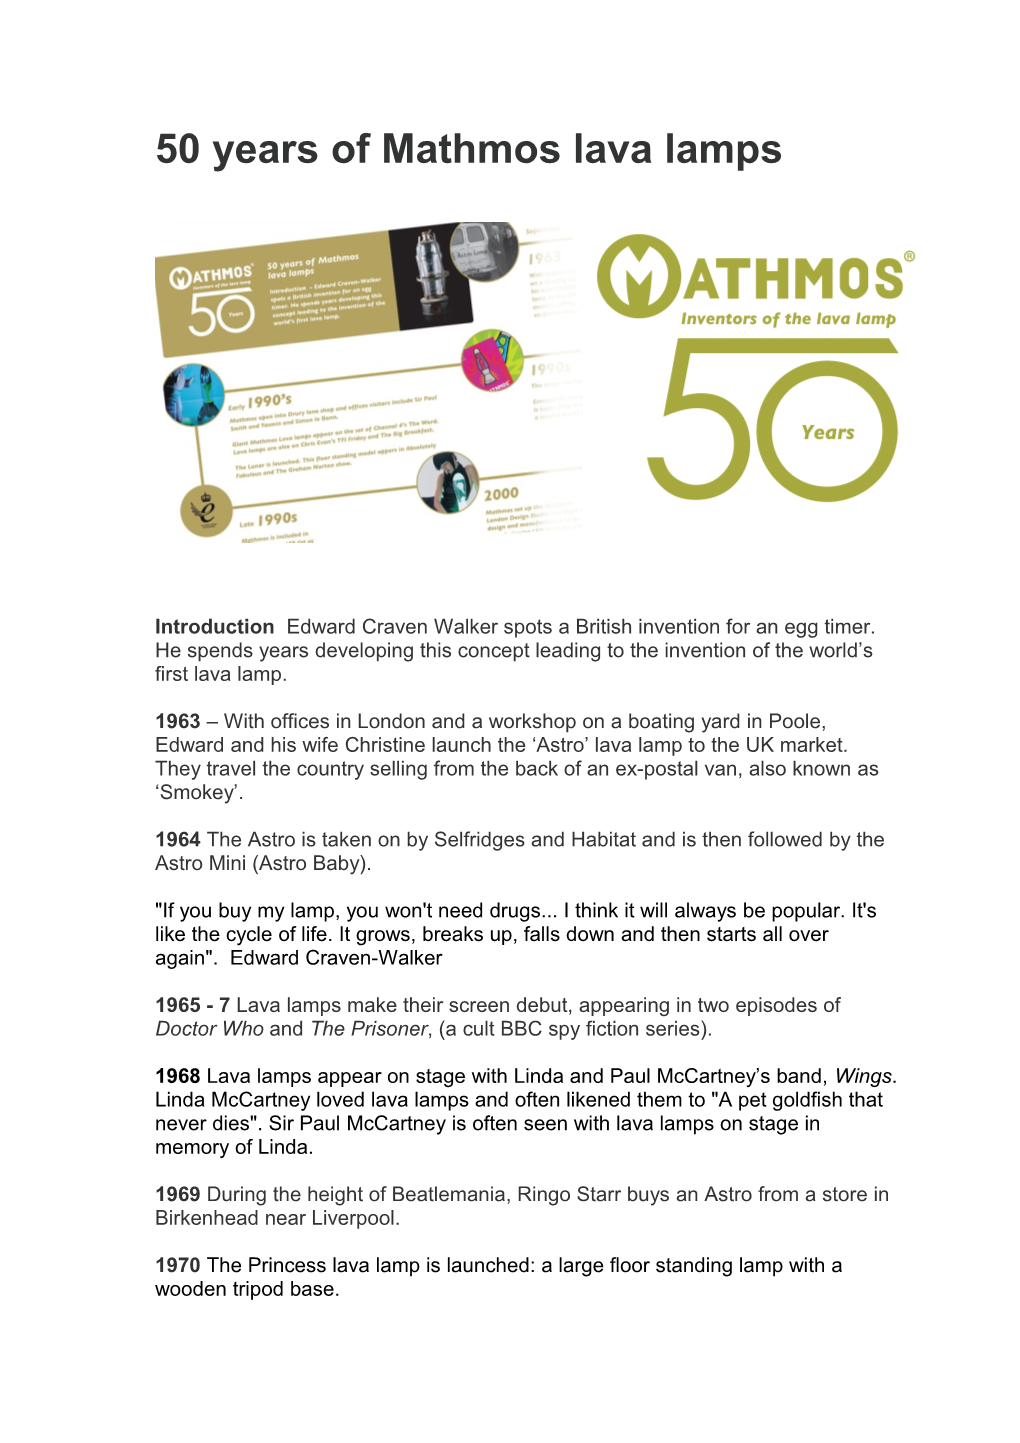 50 Years of Mathmos Lava Lamps